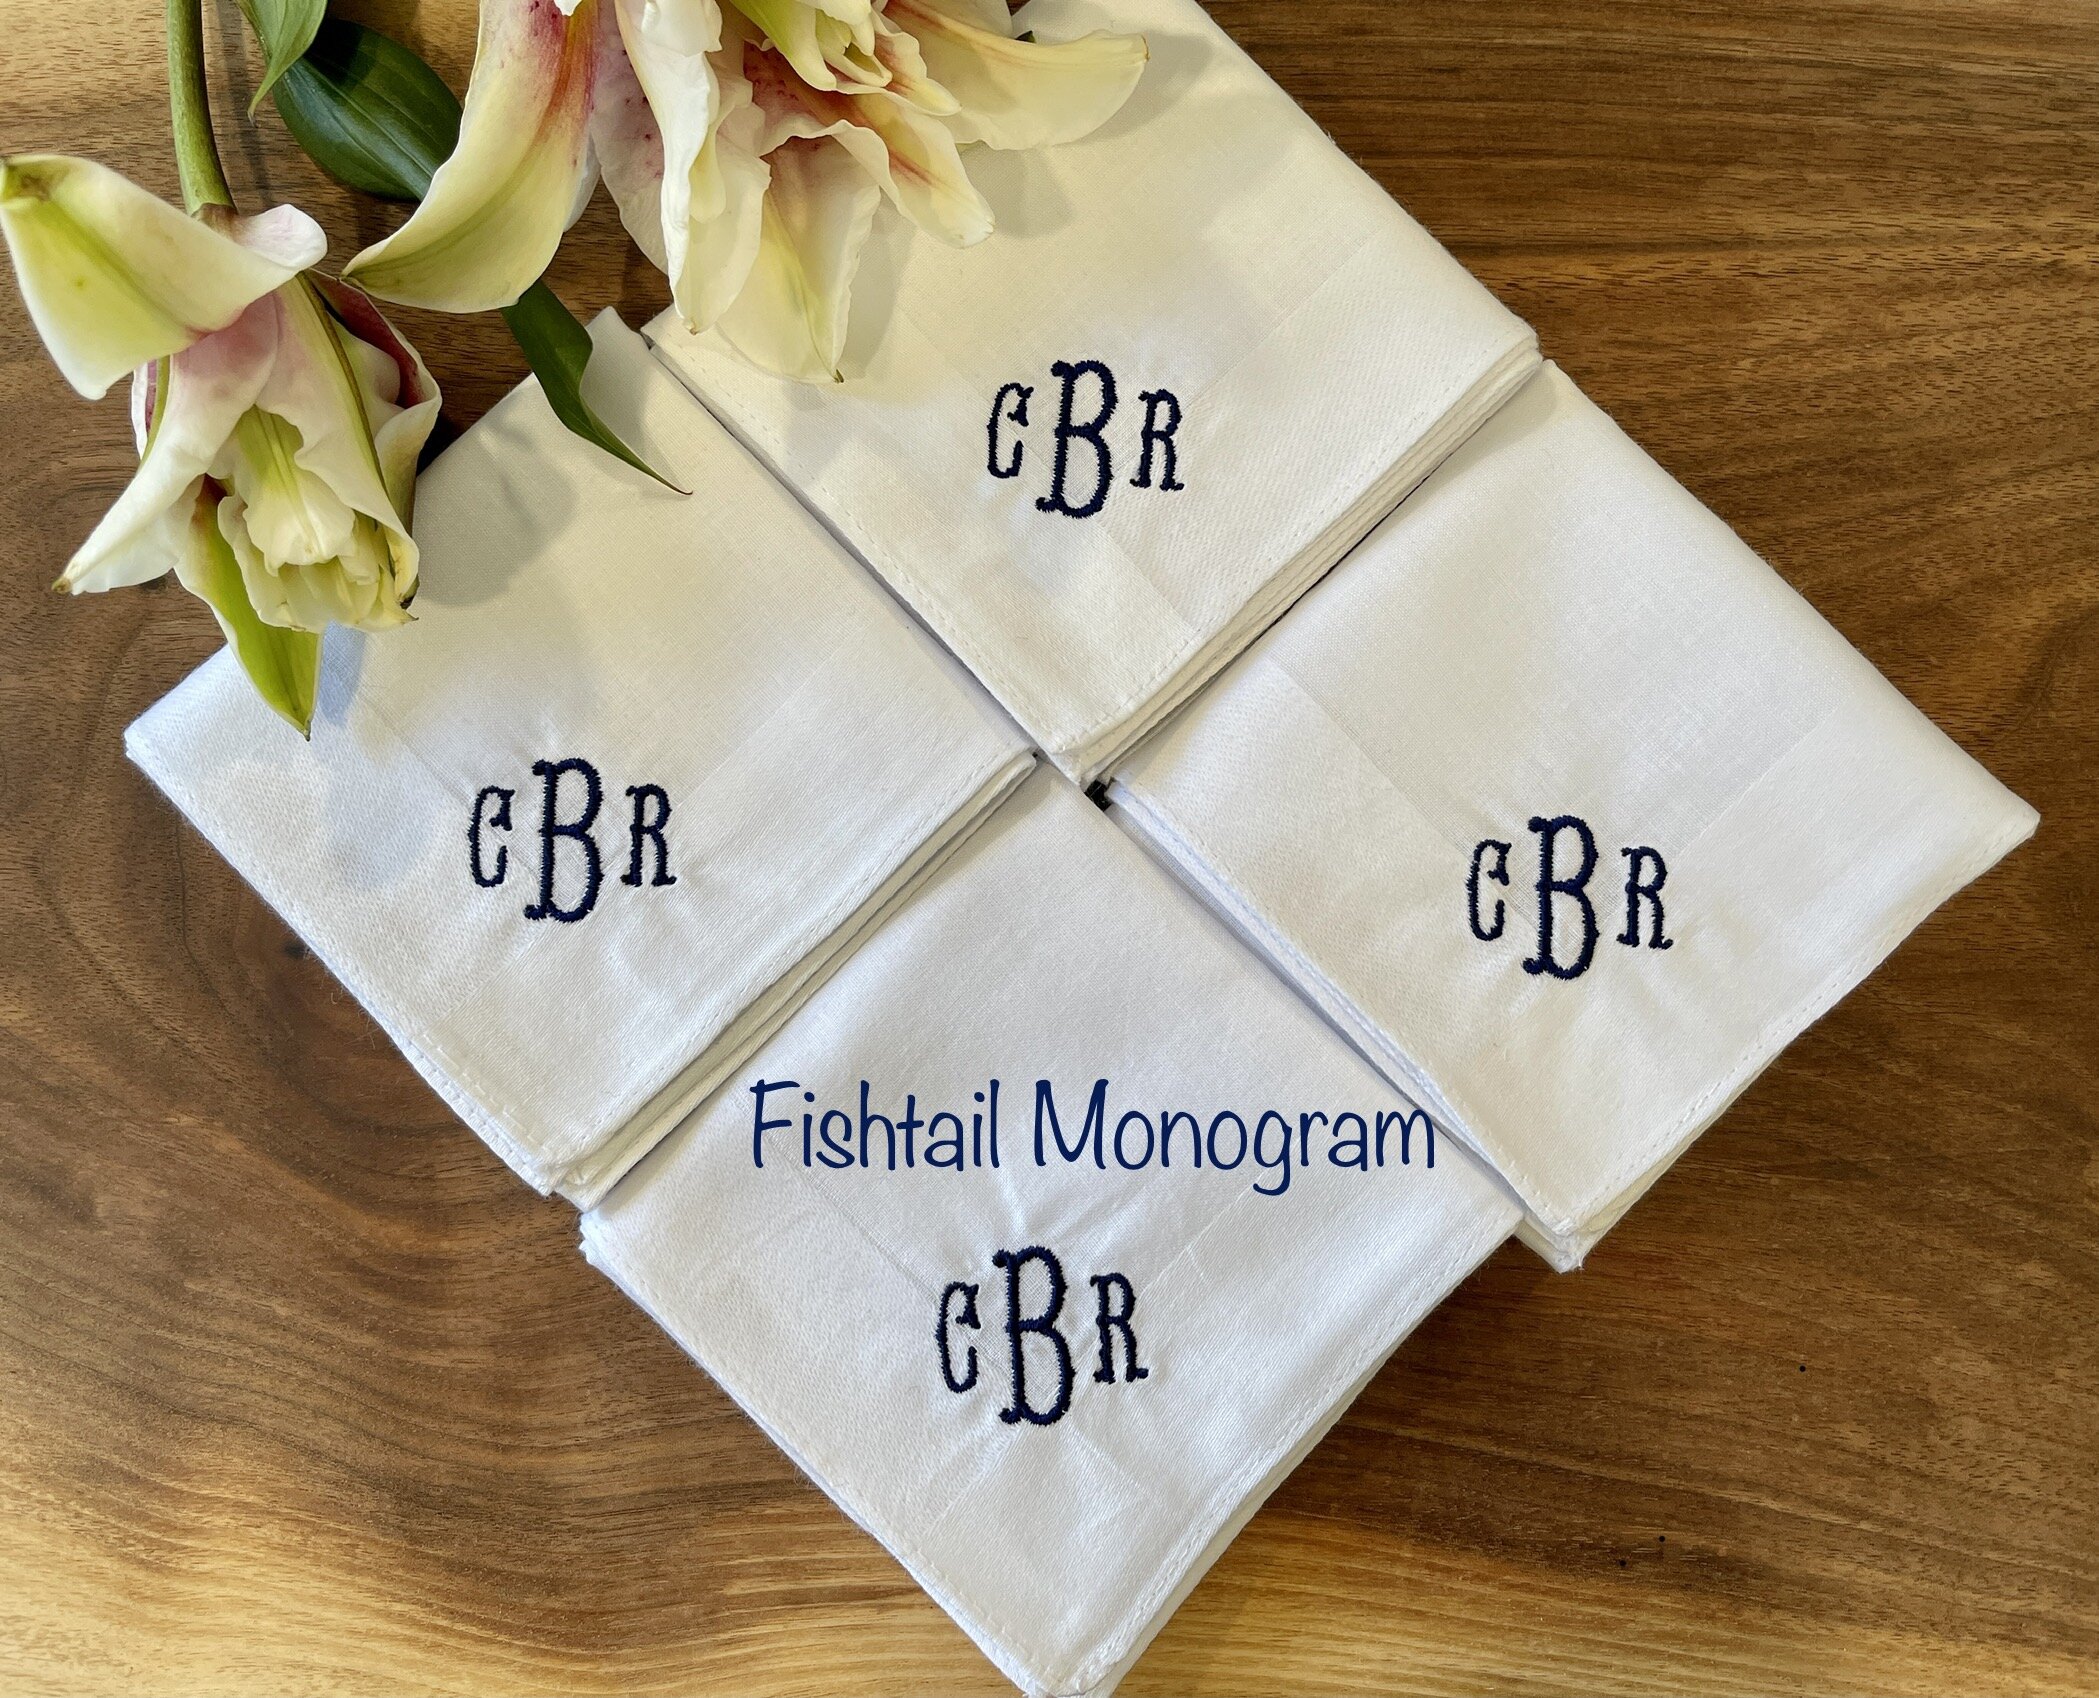 1x EMBROIDERED PERSONALISED HANDKERCHIEF INITIAL NAME LETTER MONOGRAM HANKIE 